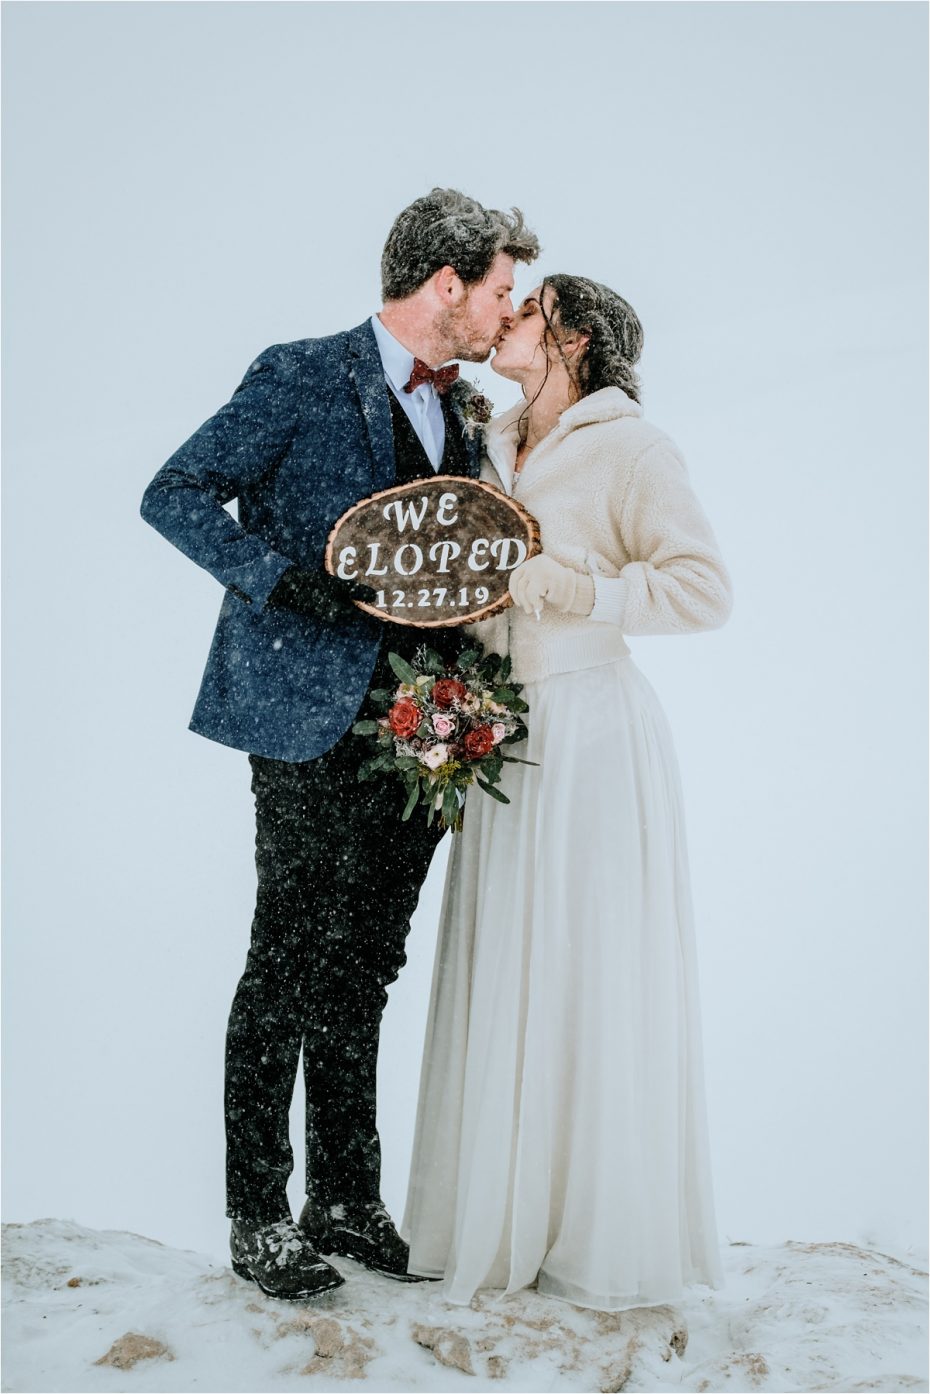 Bride and groom hold a sign that says "we eloped" as they kiss in the snow. The perfect detail to mark the occasion.